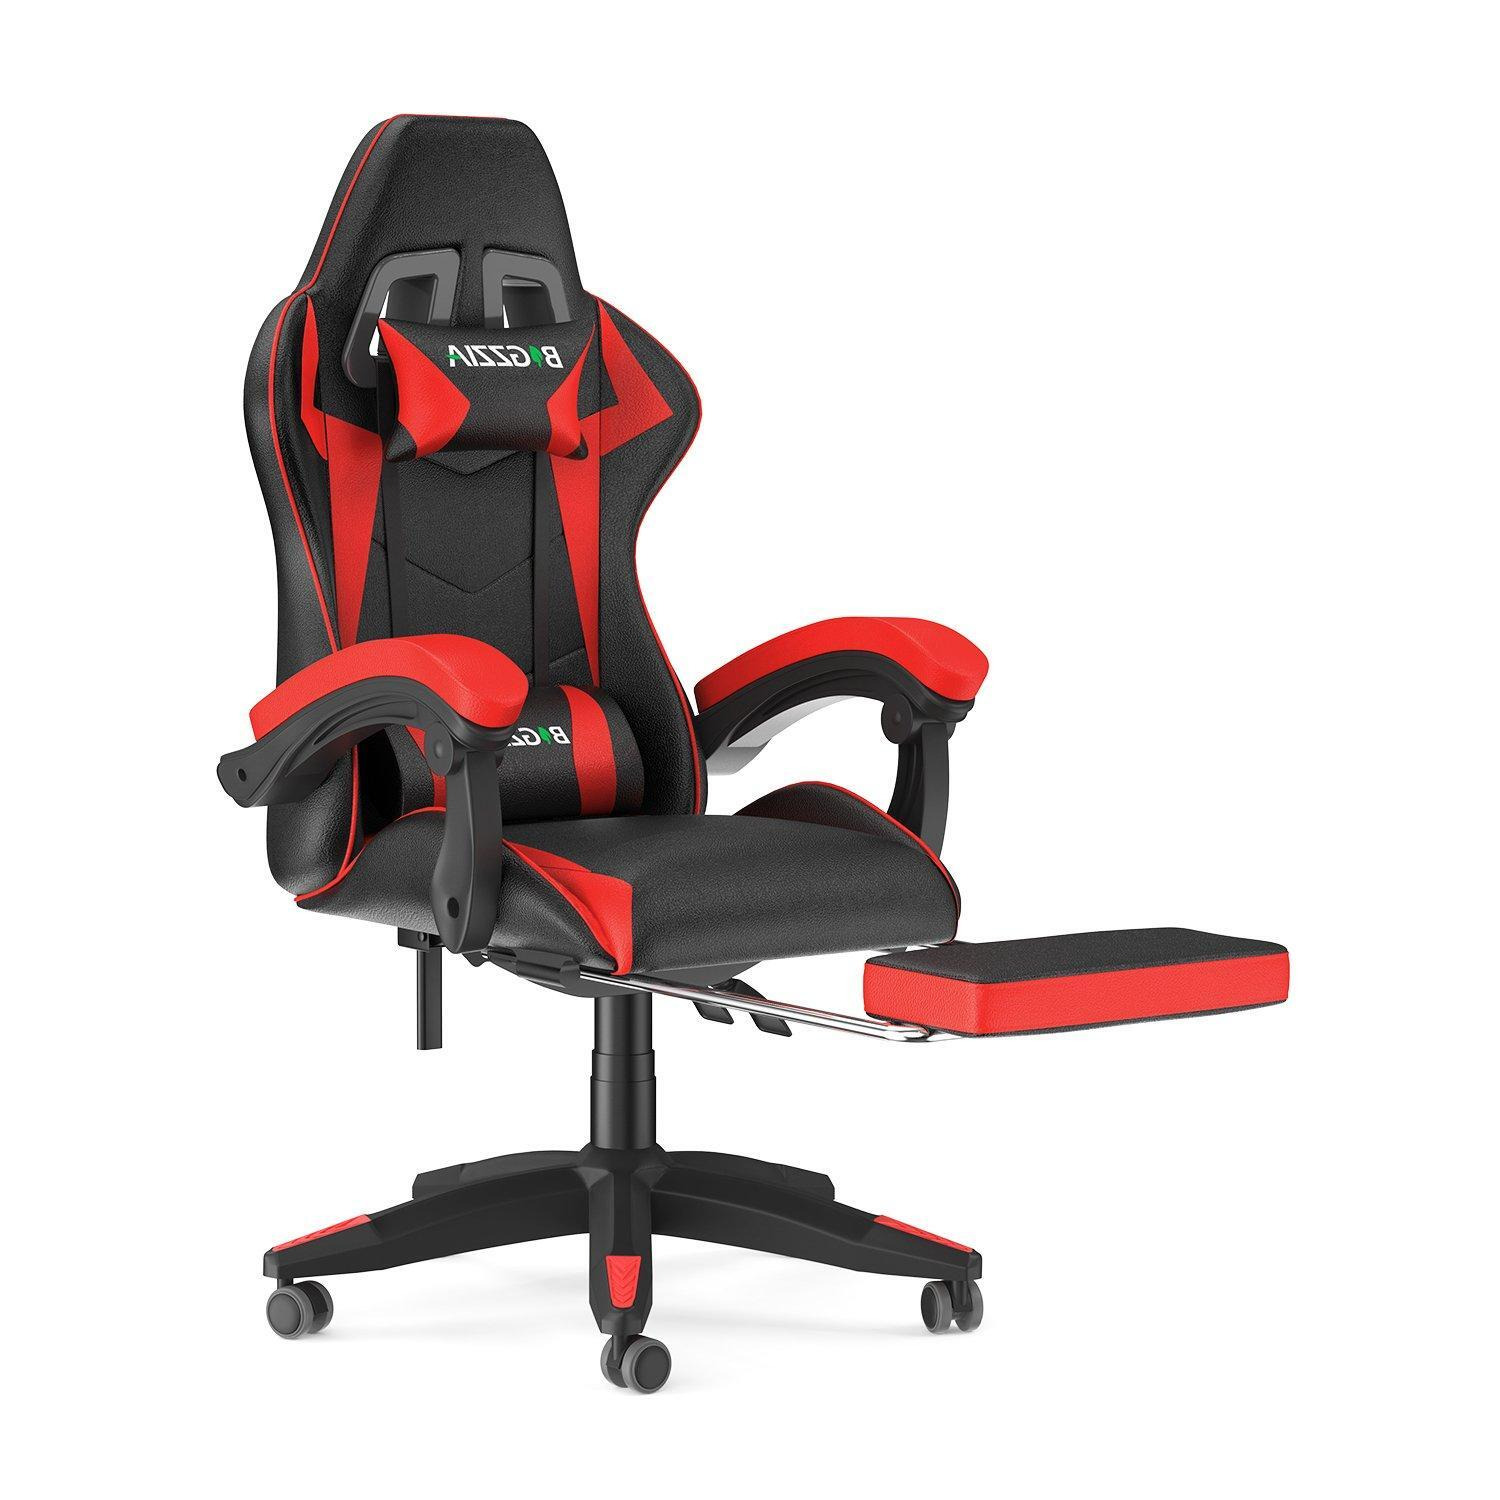 Ergonomic Gaming Chair with Footrest - image 1